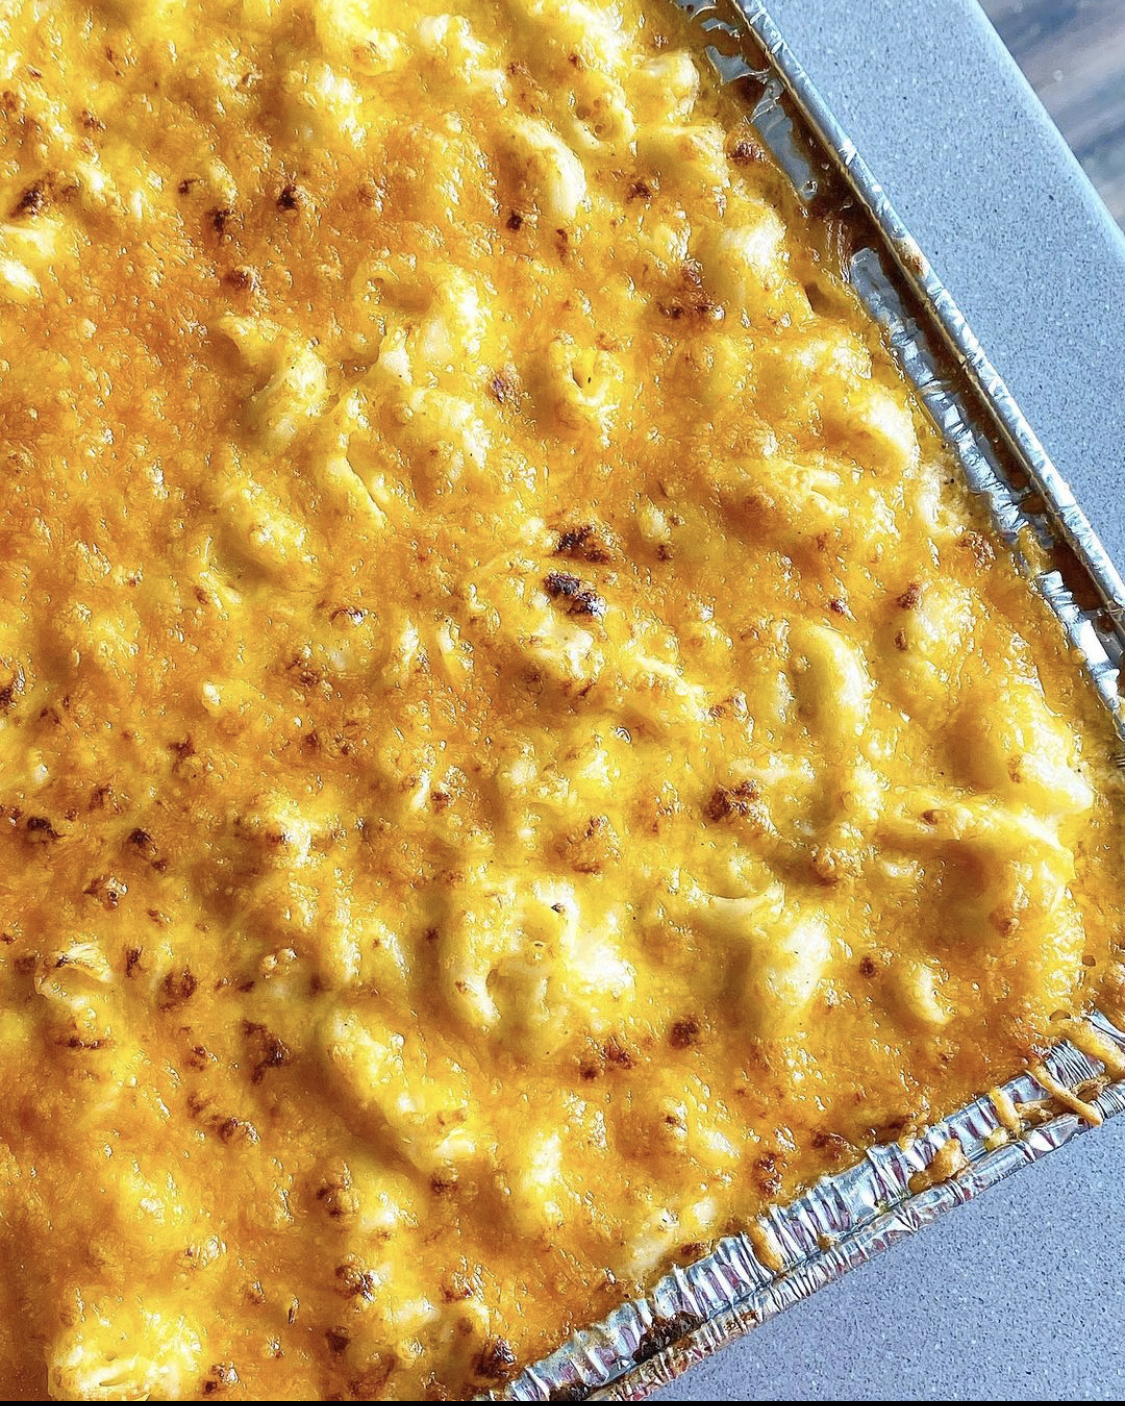 Spicy Mac and Cheese